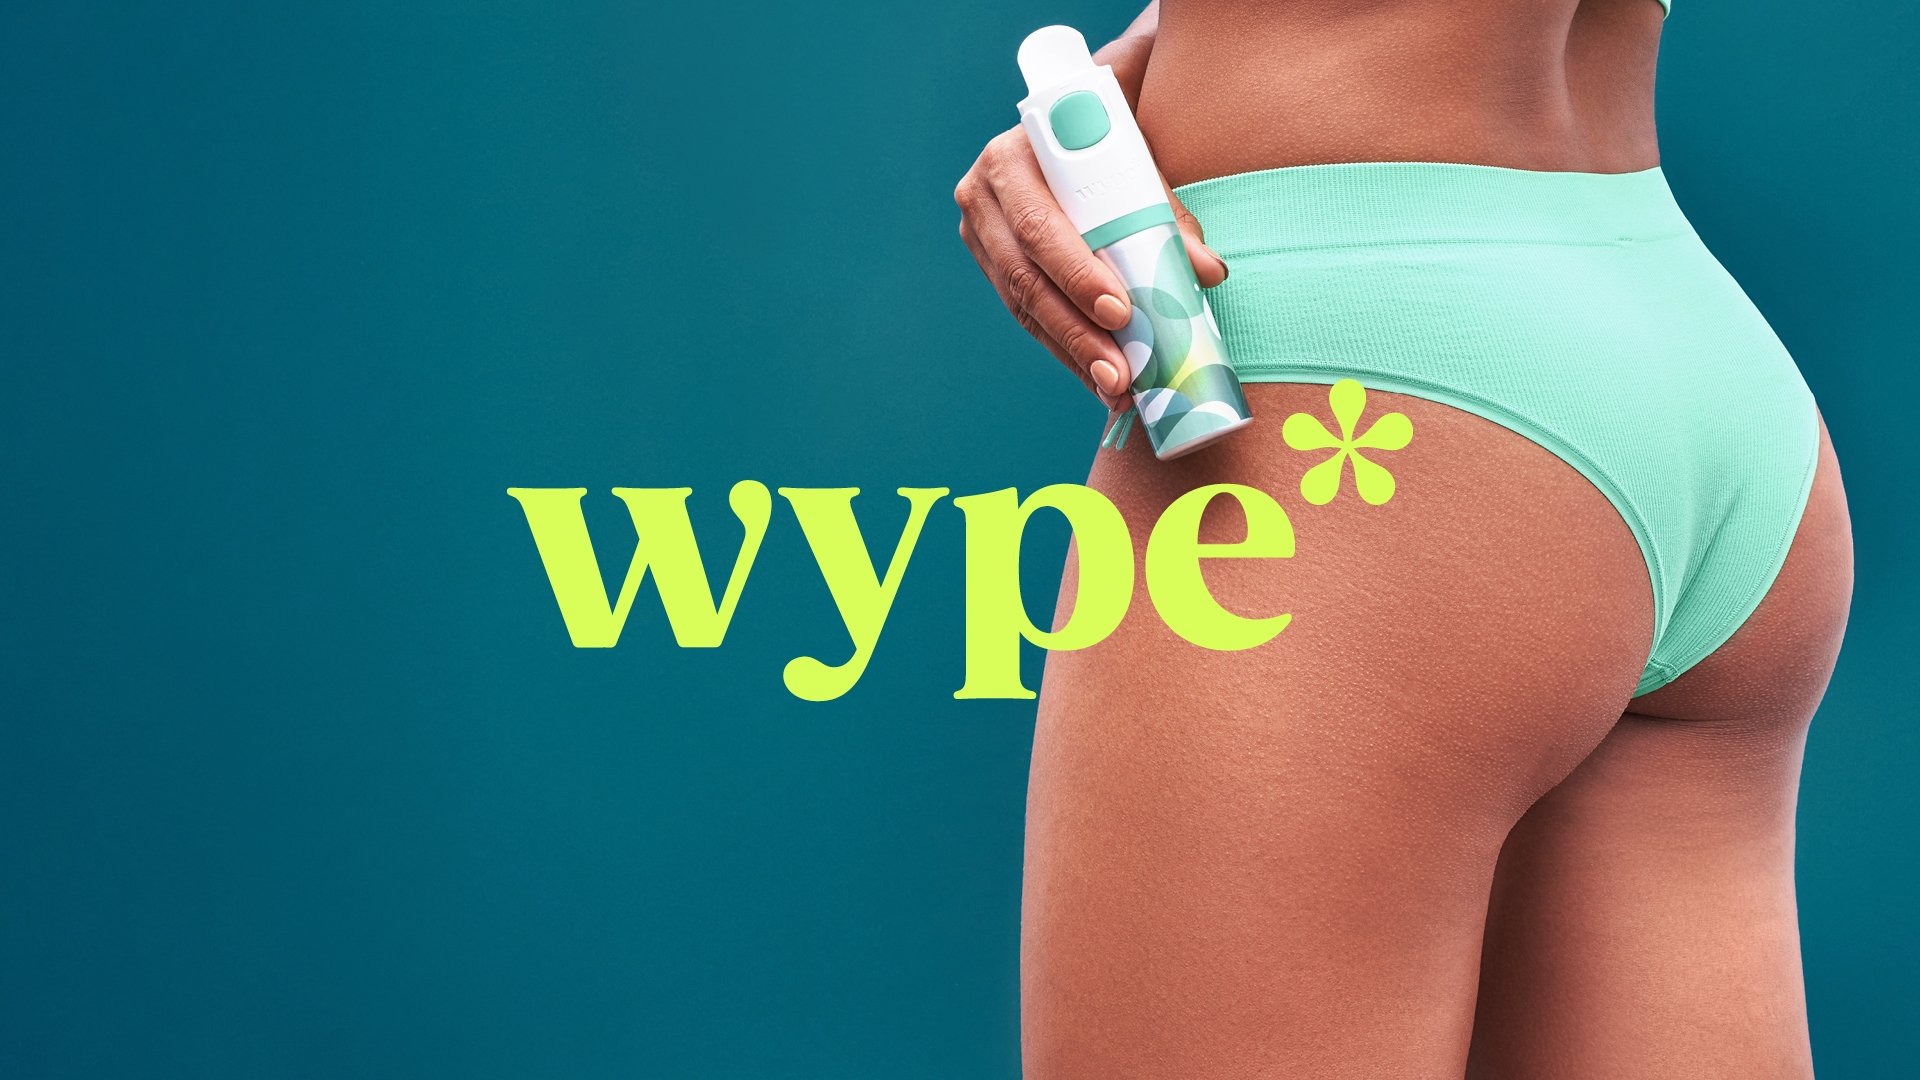 Logotype set in Gazpacho by Monotype for below the waist hygiene brand Wype designed by London-based studio Among Equals